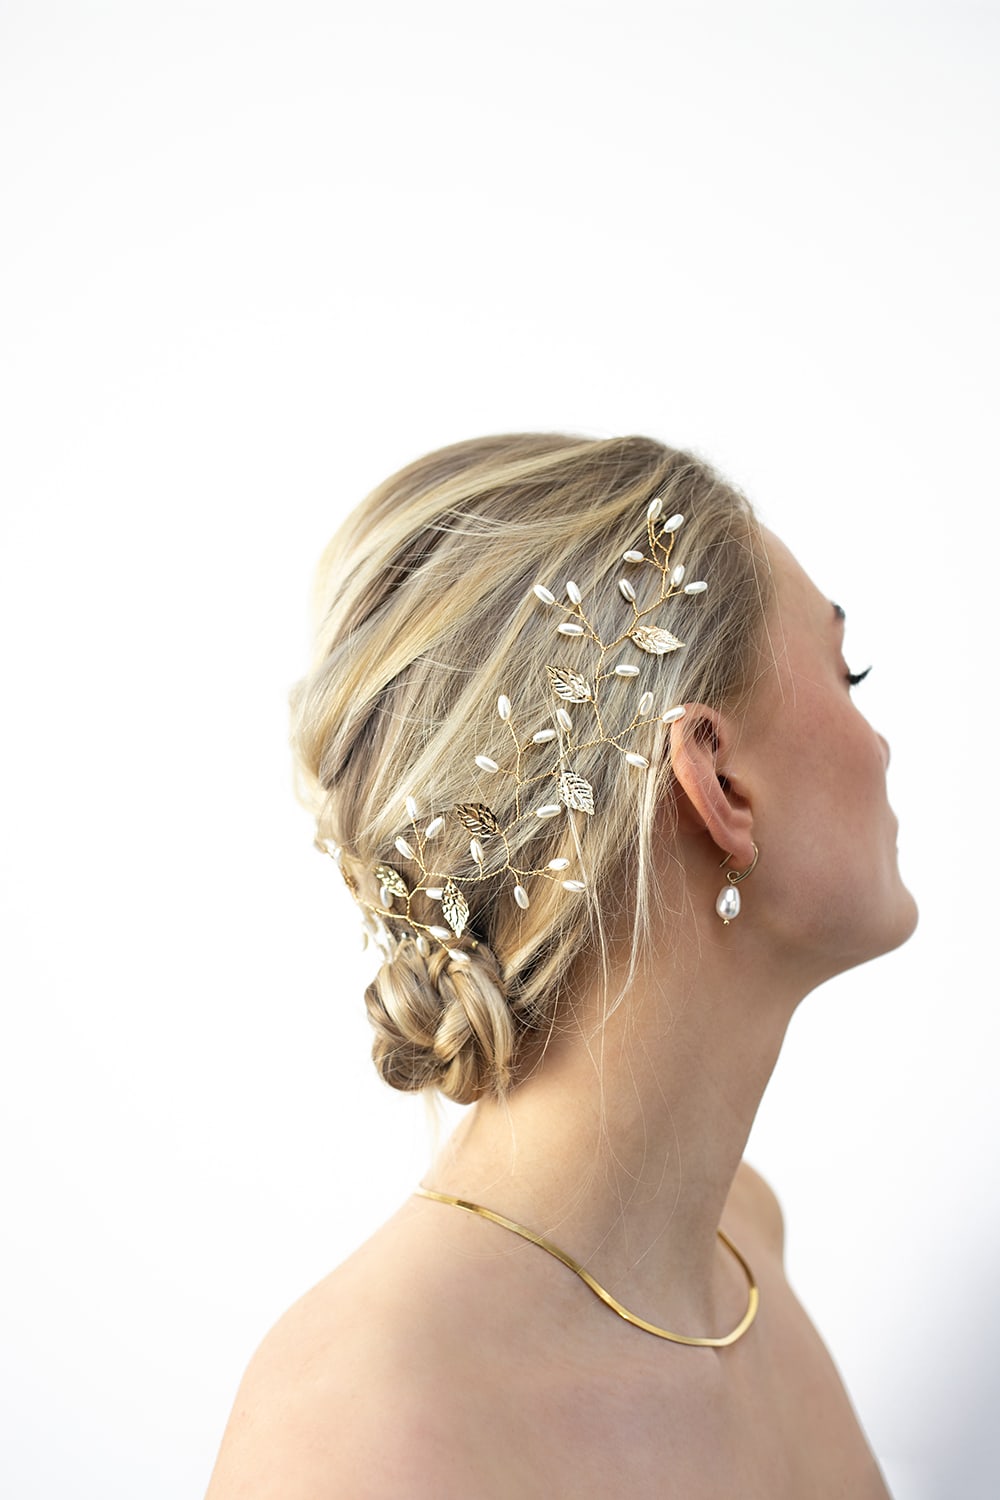 woman in wedding dress wearing a gold headband with pearls